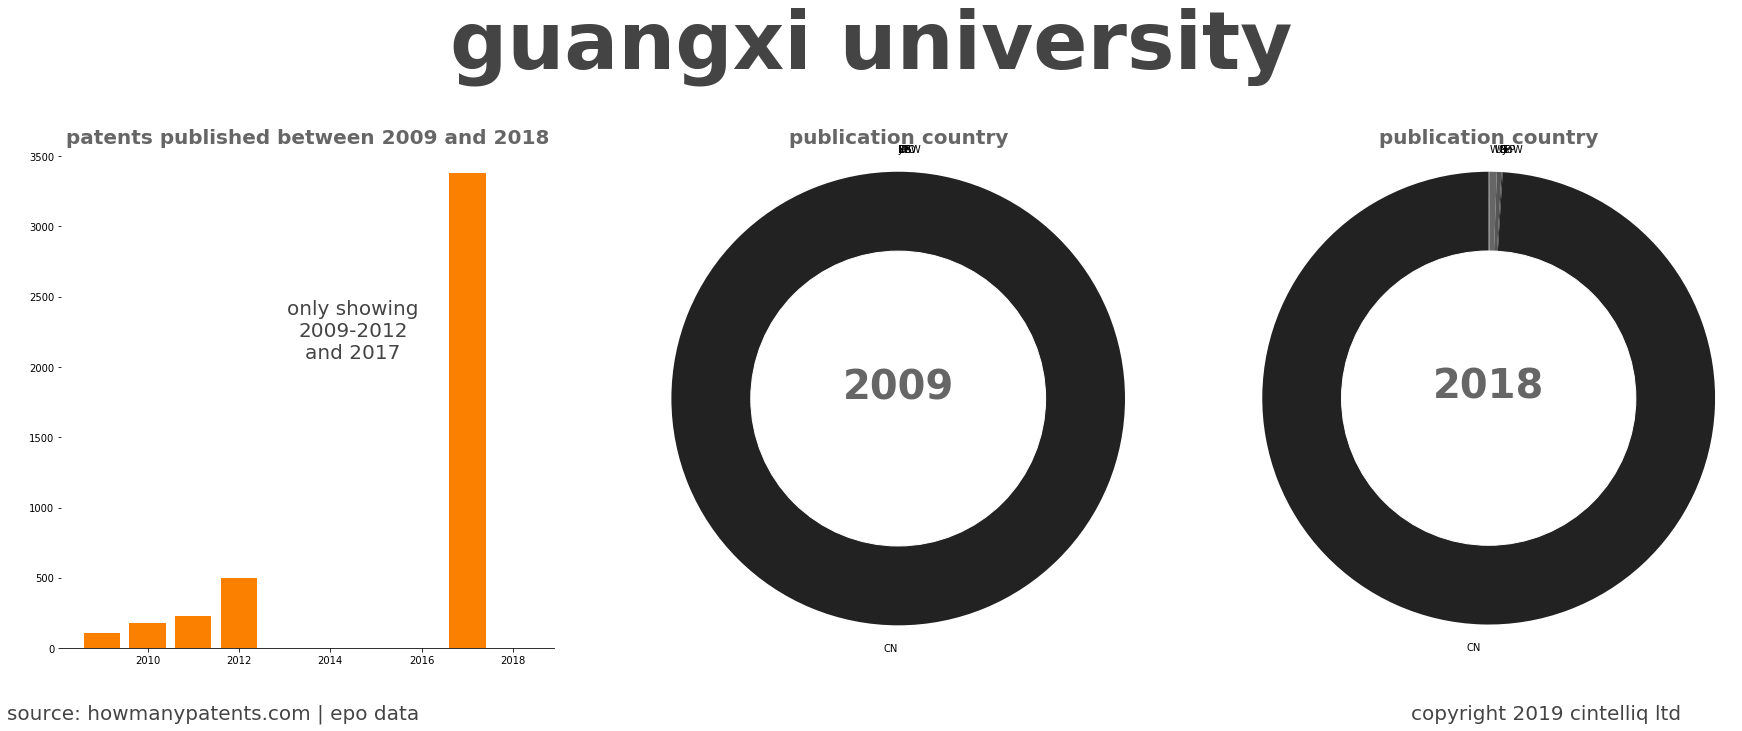 summary of patents for Guangxi University